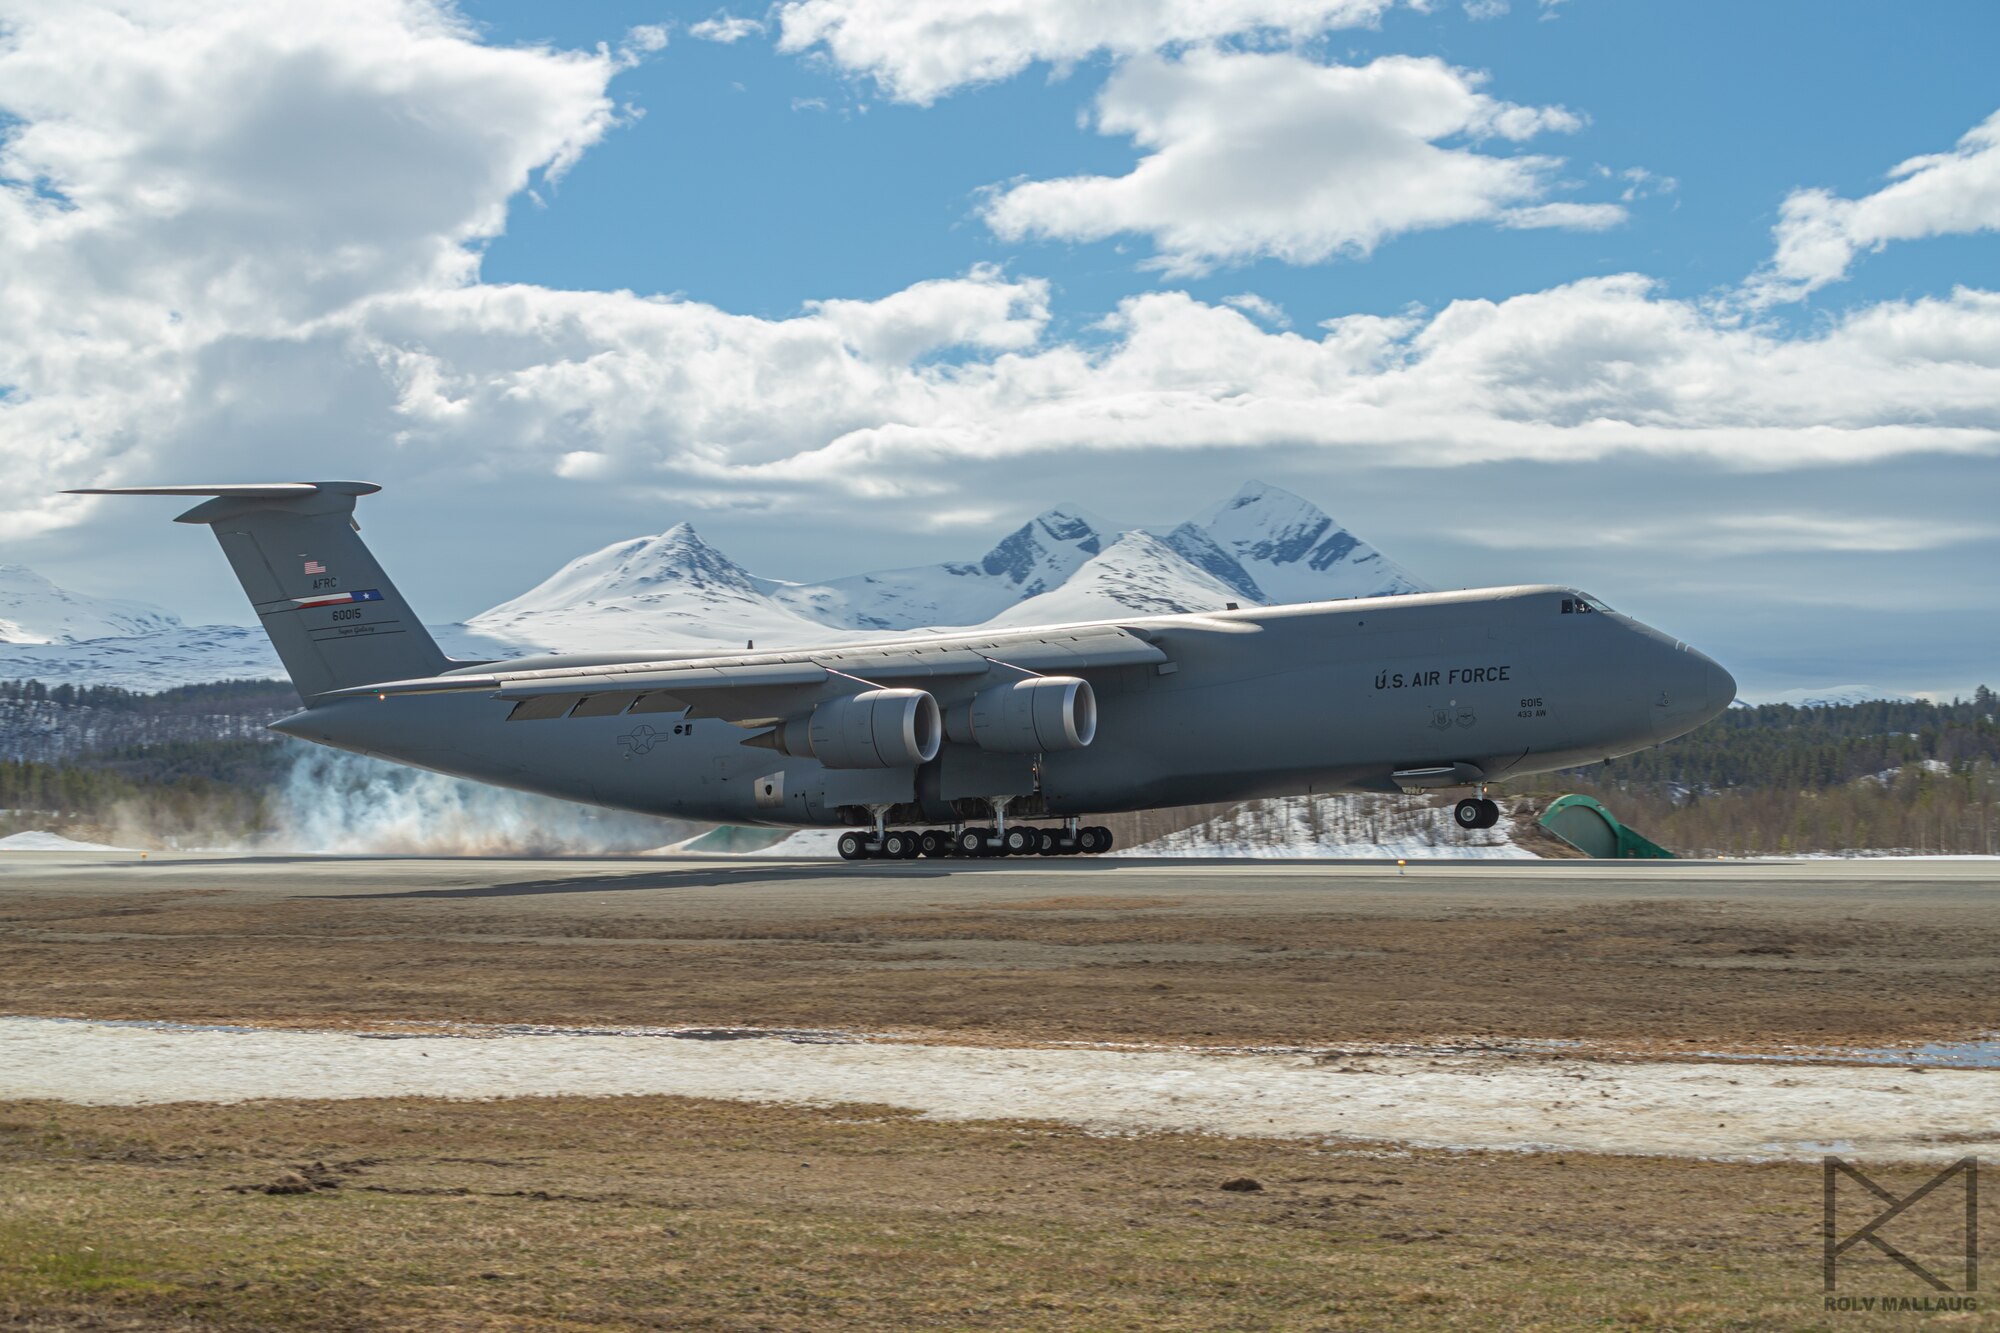 A C-5M Super Galaxy aircraft, assigned to the 433rd Airlift Wing, Joint Base San Antonio-Lackland, Texas, touches down at Royal Norwegian Air Force Bardufoss Air Station, Norway, May 26th, 2020.